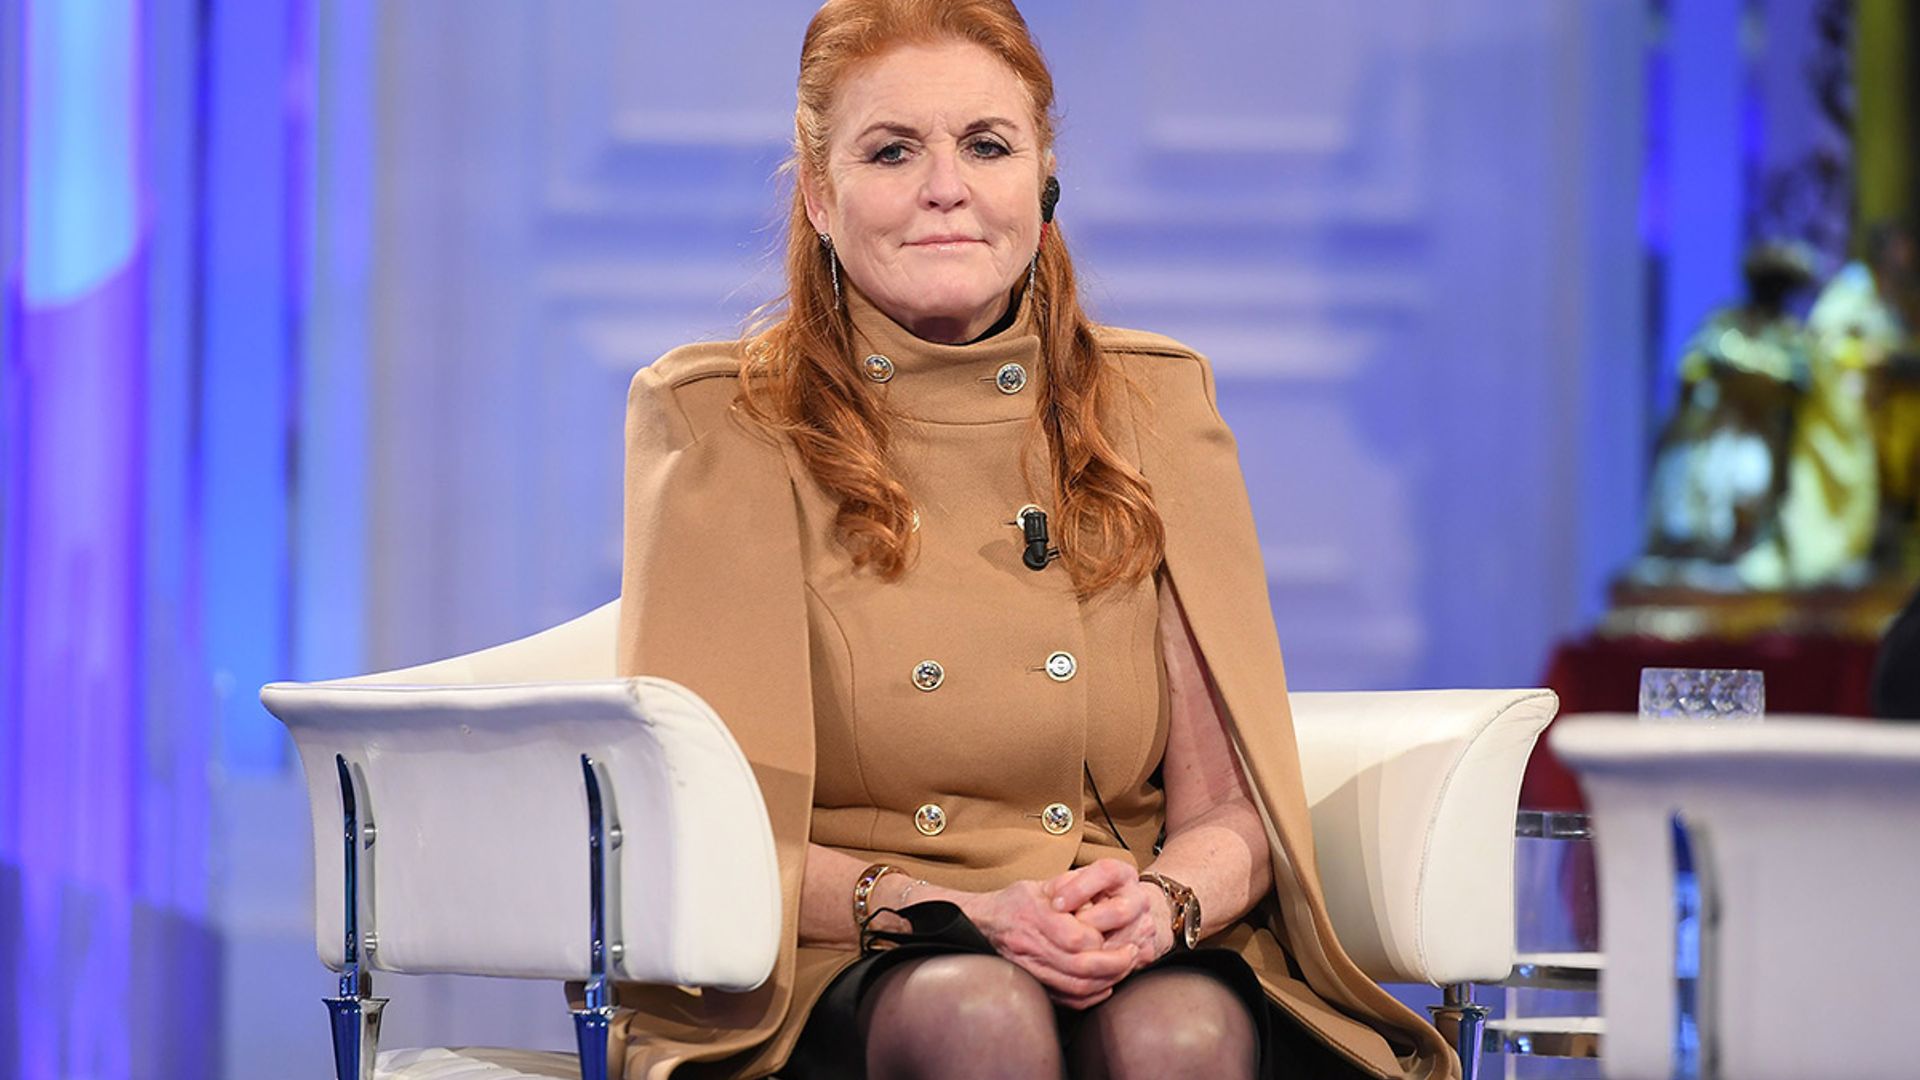 Sarah Ferguson appears to take the ultimate style tips from daughter Princess Eugenie